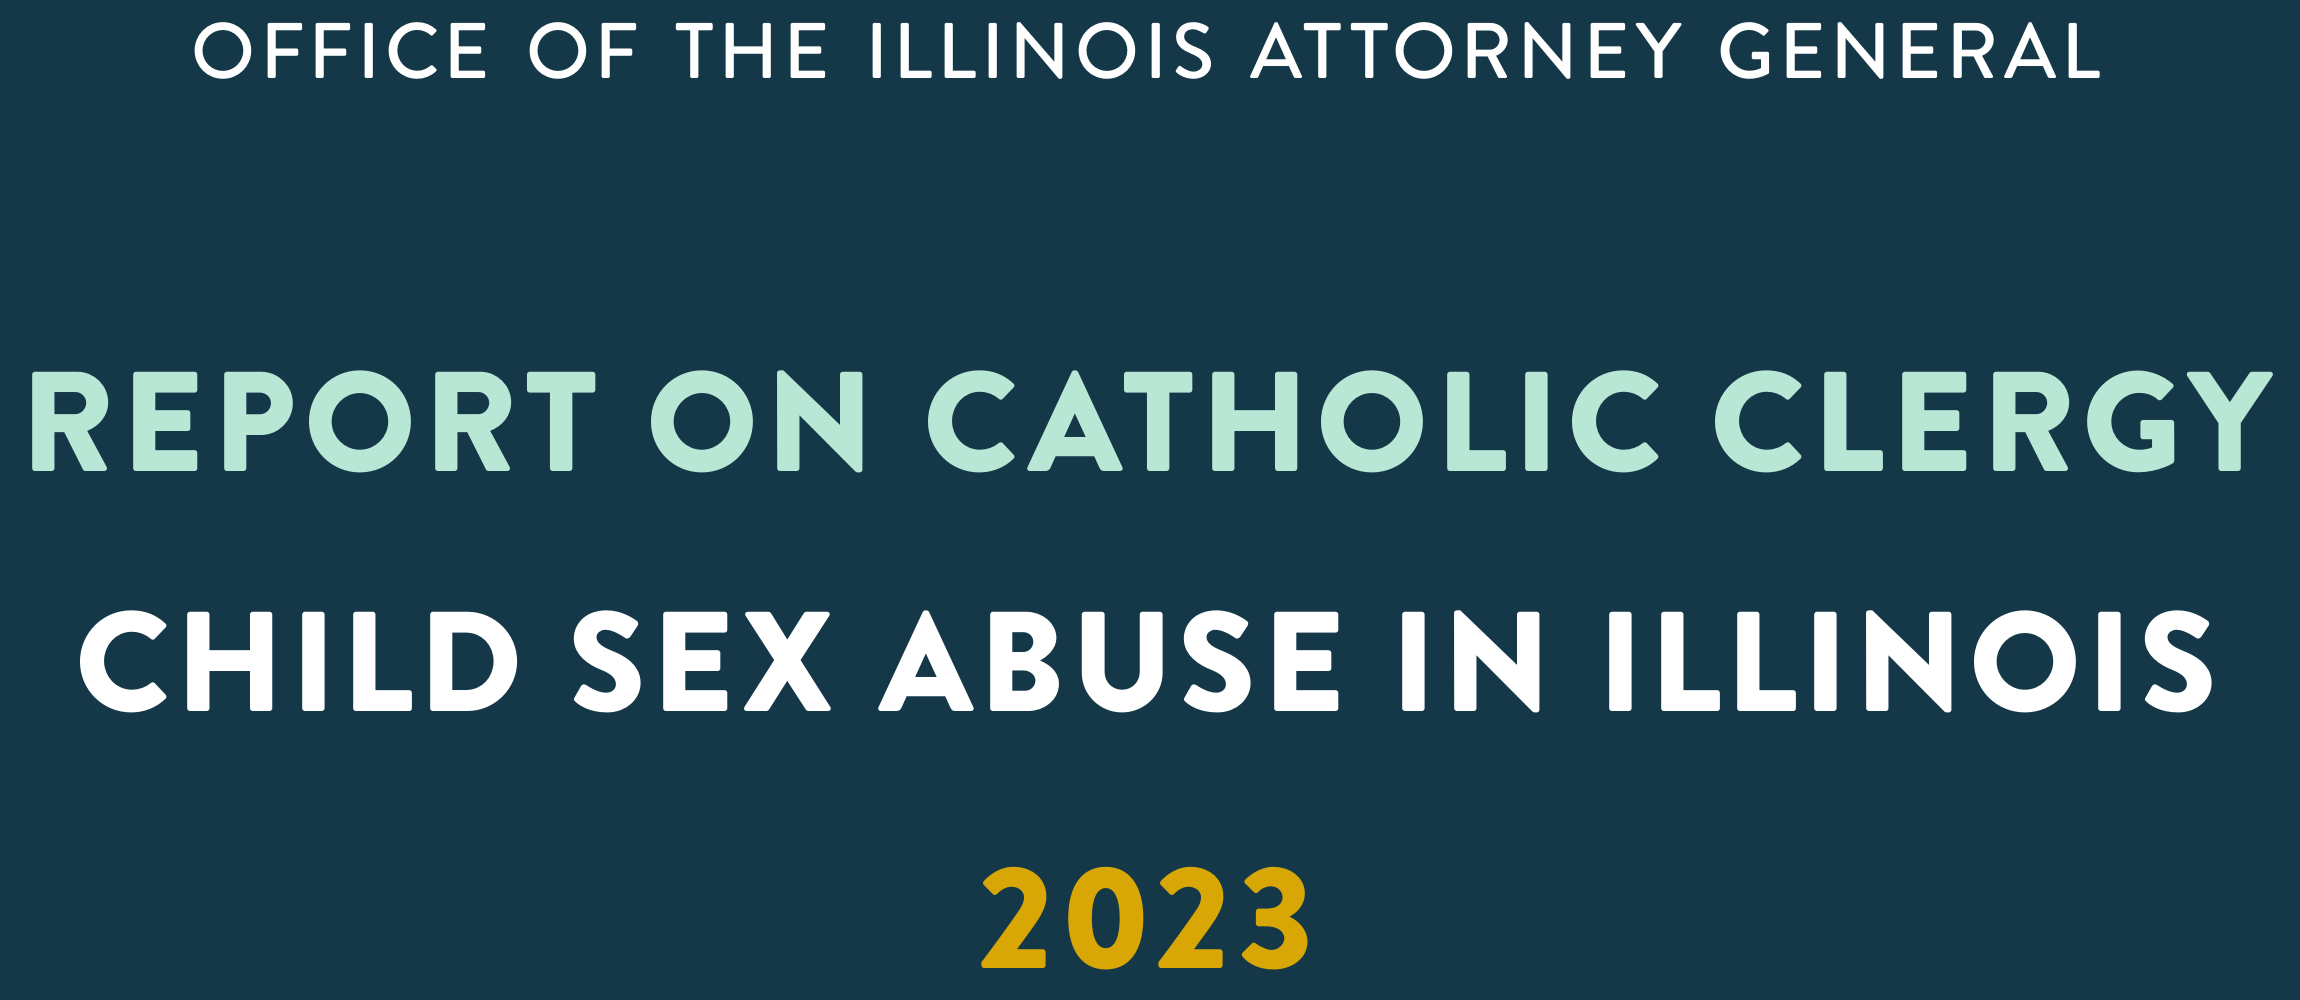 Office of the Illinois Attorney General: 2023 Report on Catholic Clergy Child Sex Abuse in Illinois